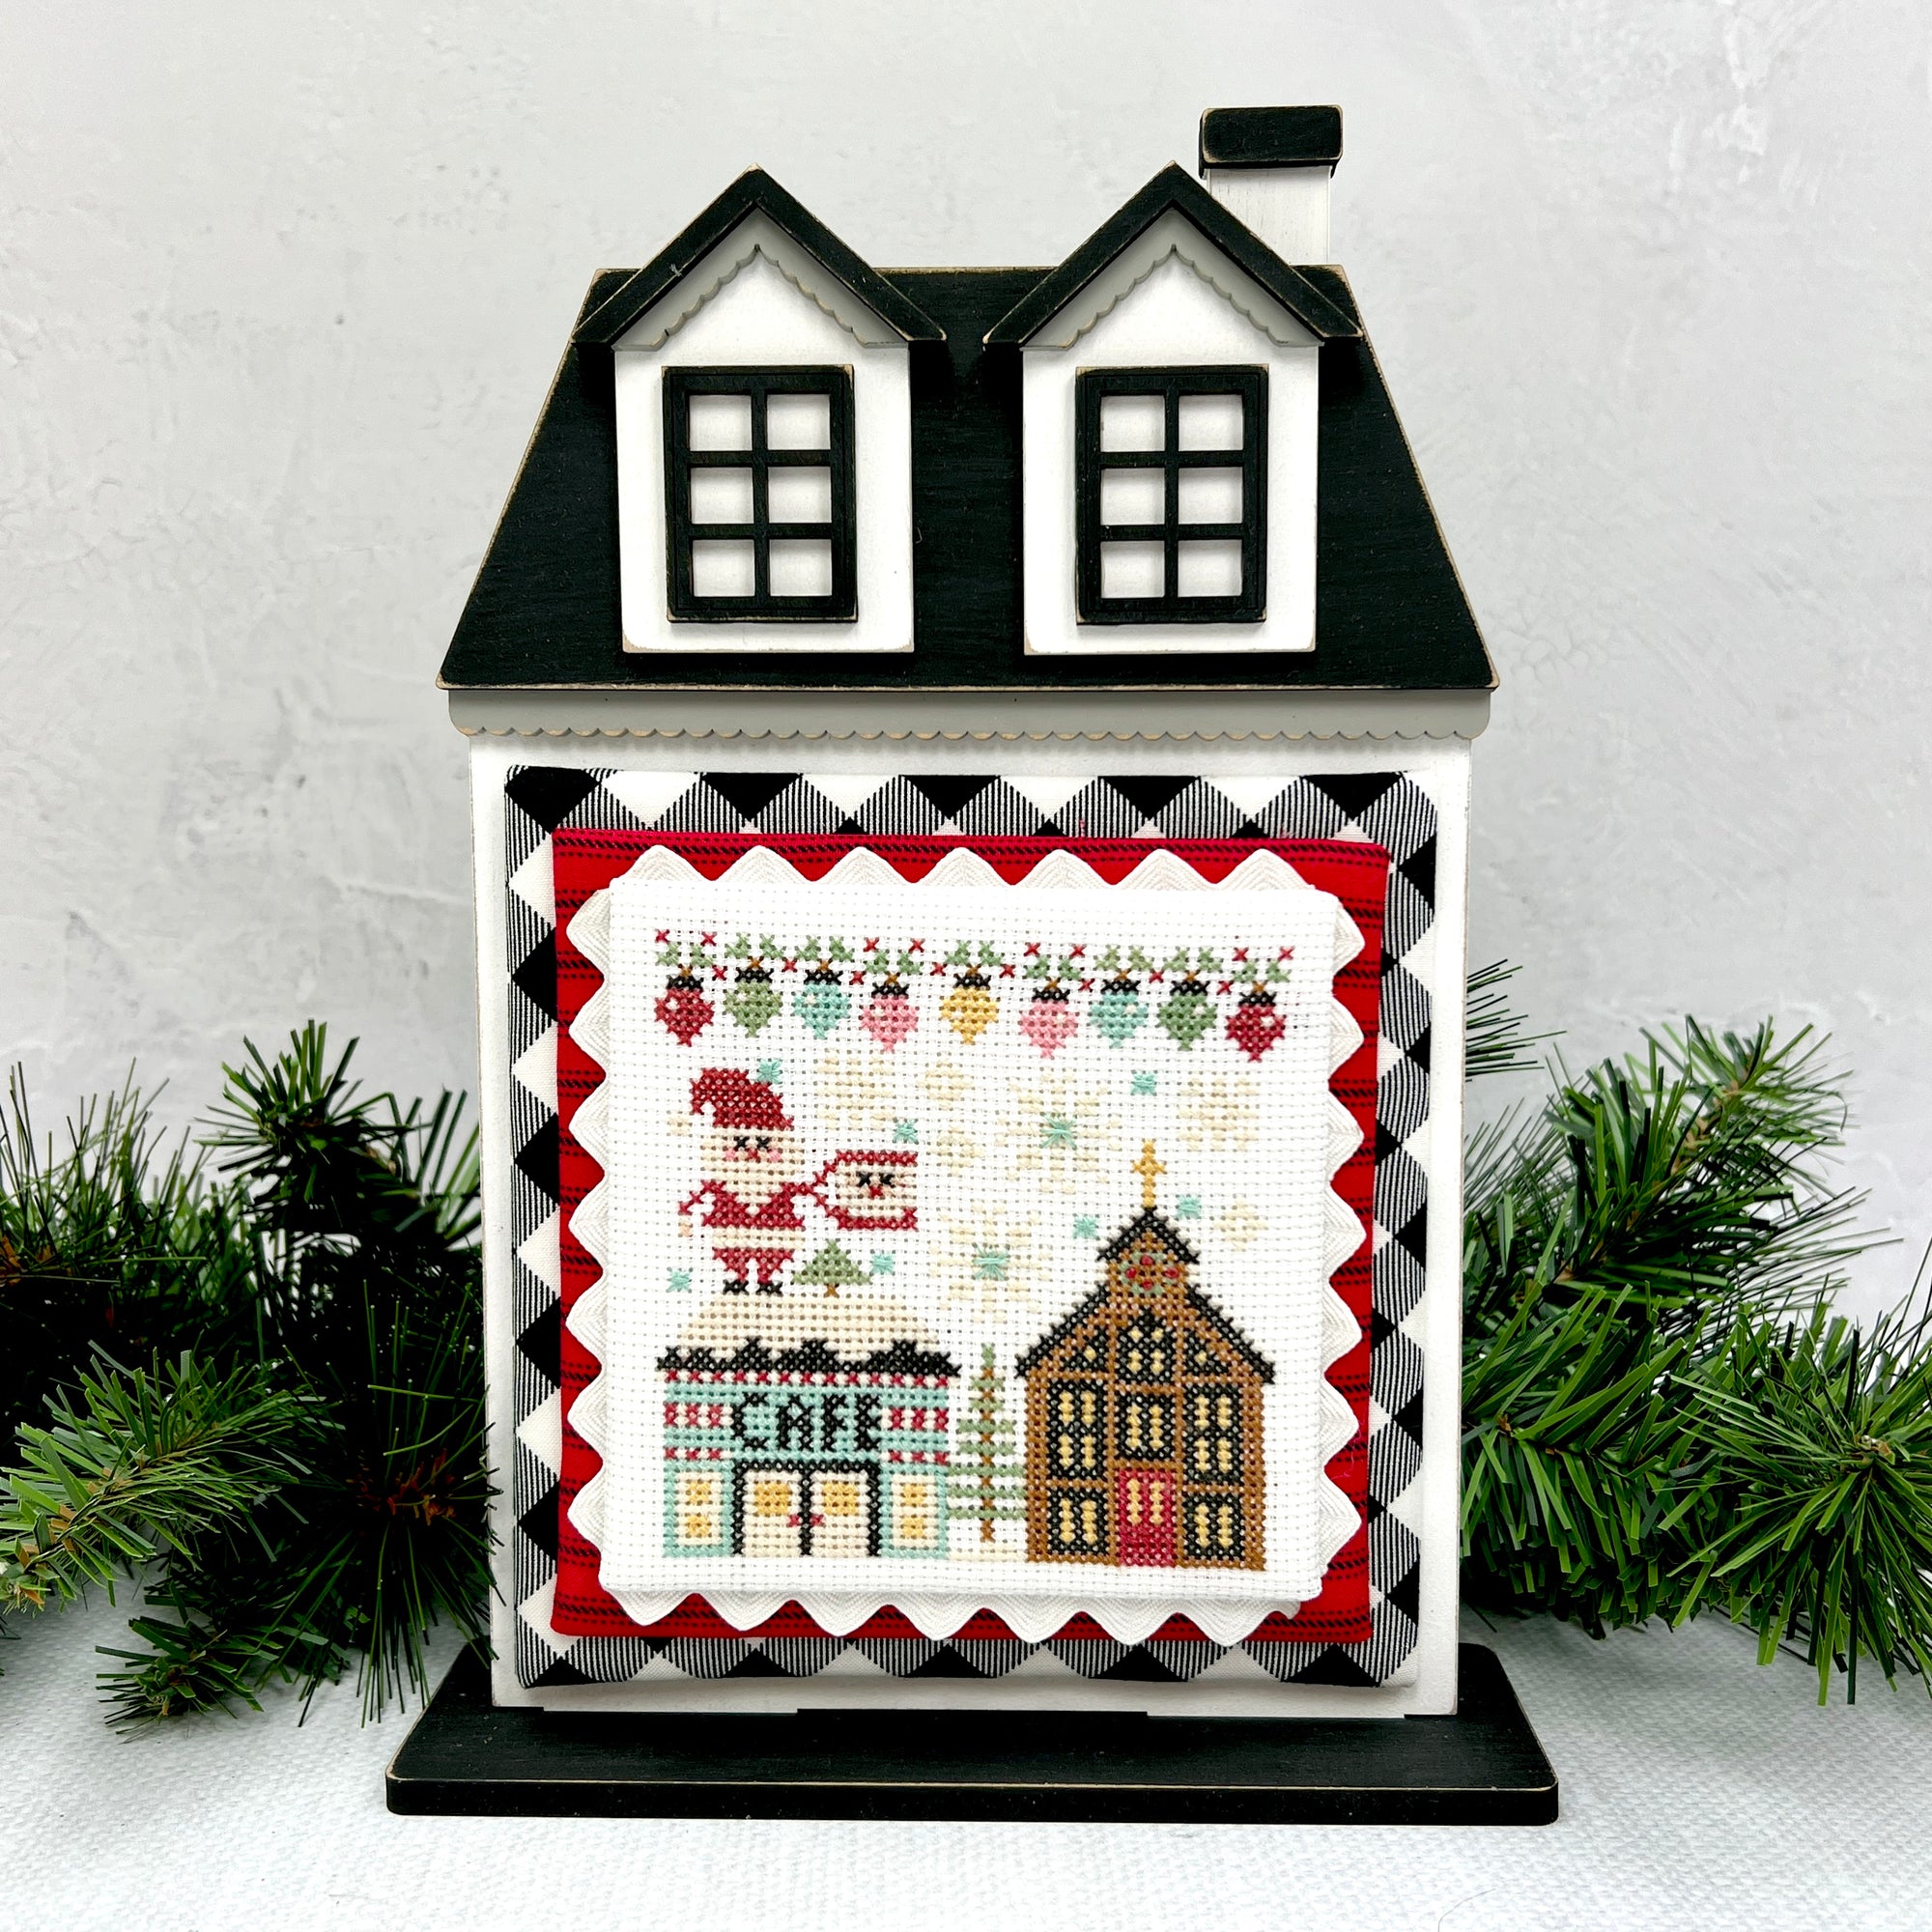 City Christmas cross stitch by Stitching with the Housewives shown on a wood city house